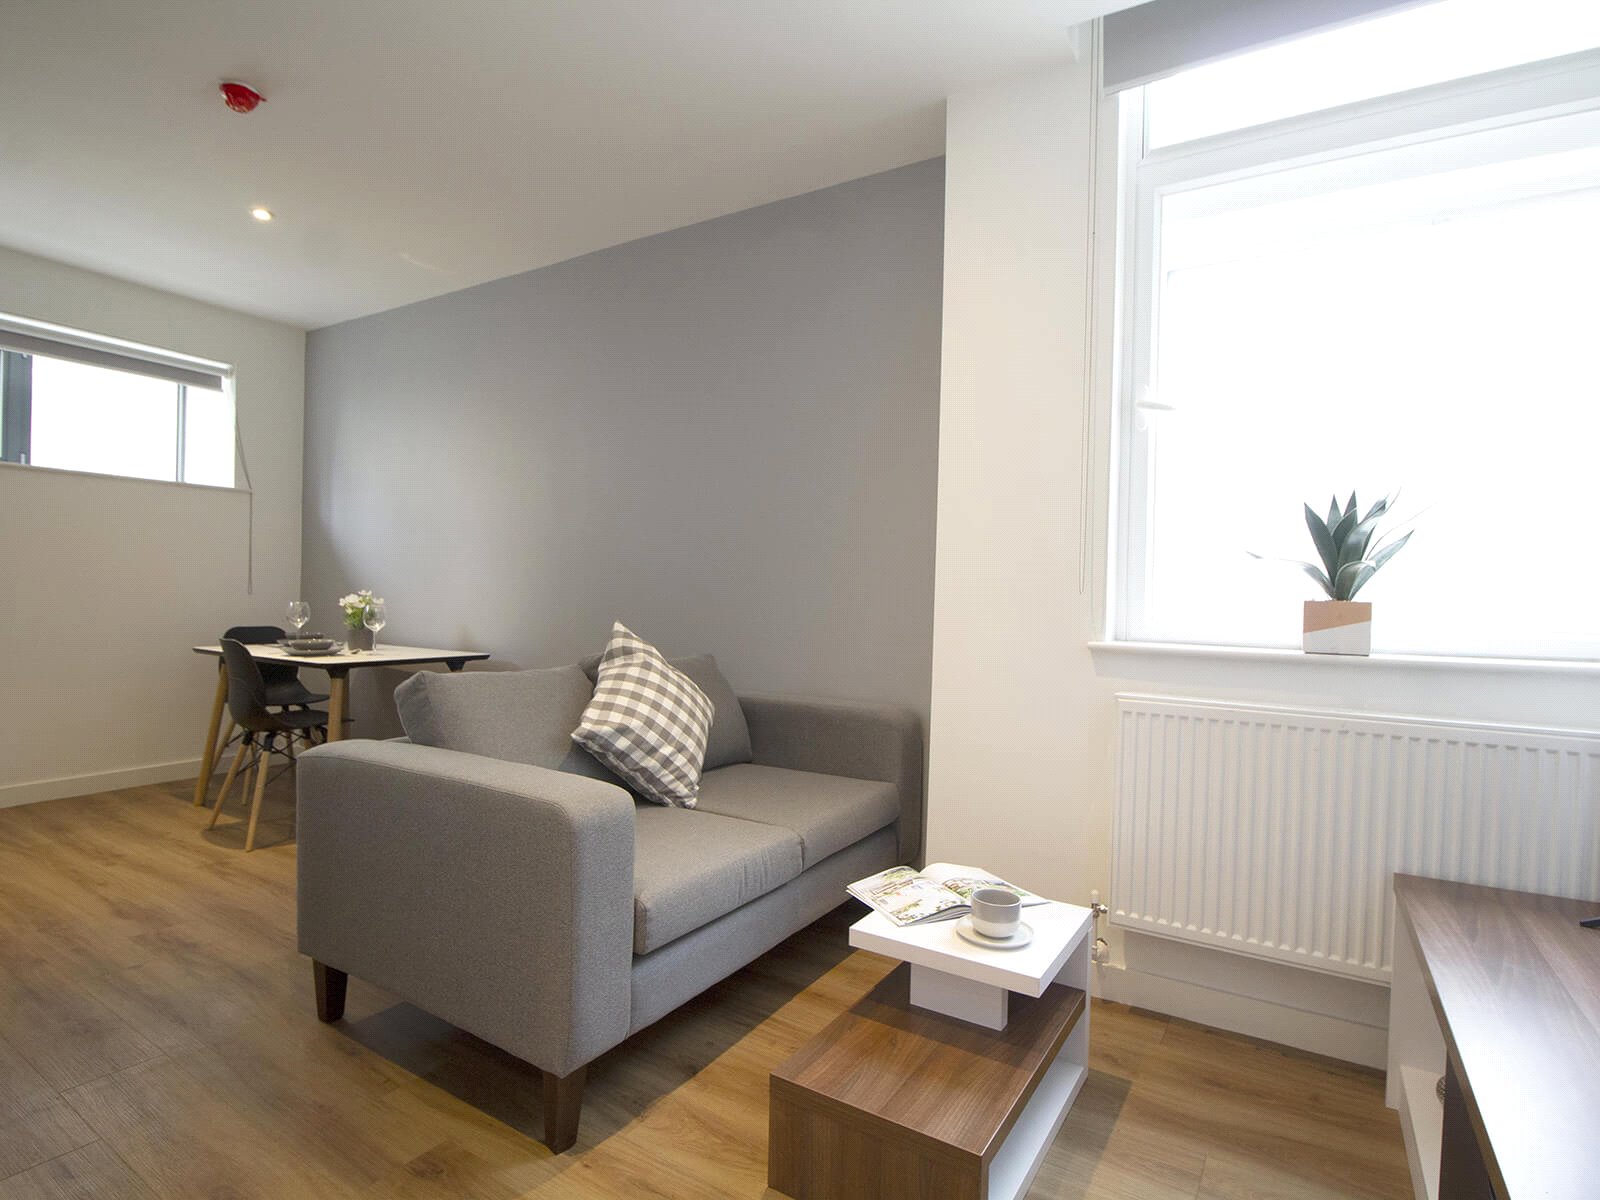 2 bed flat for rent in Liverpool. From rentbunk.com